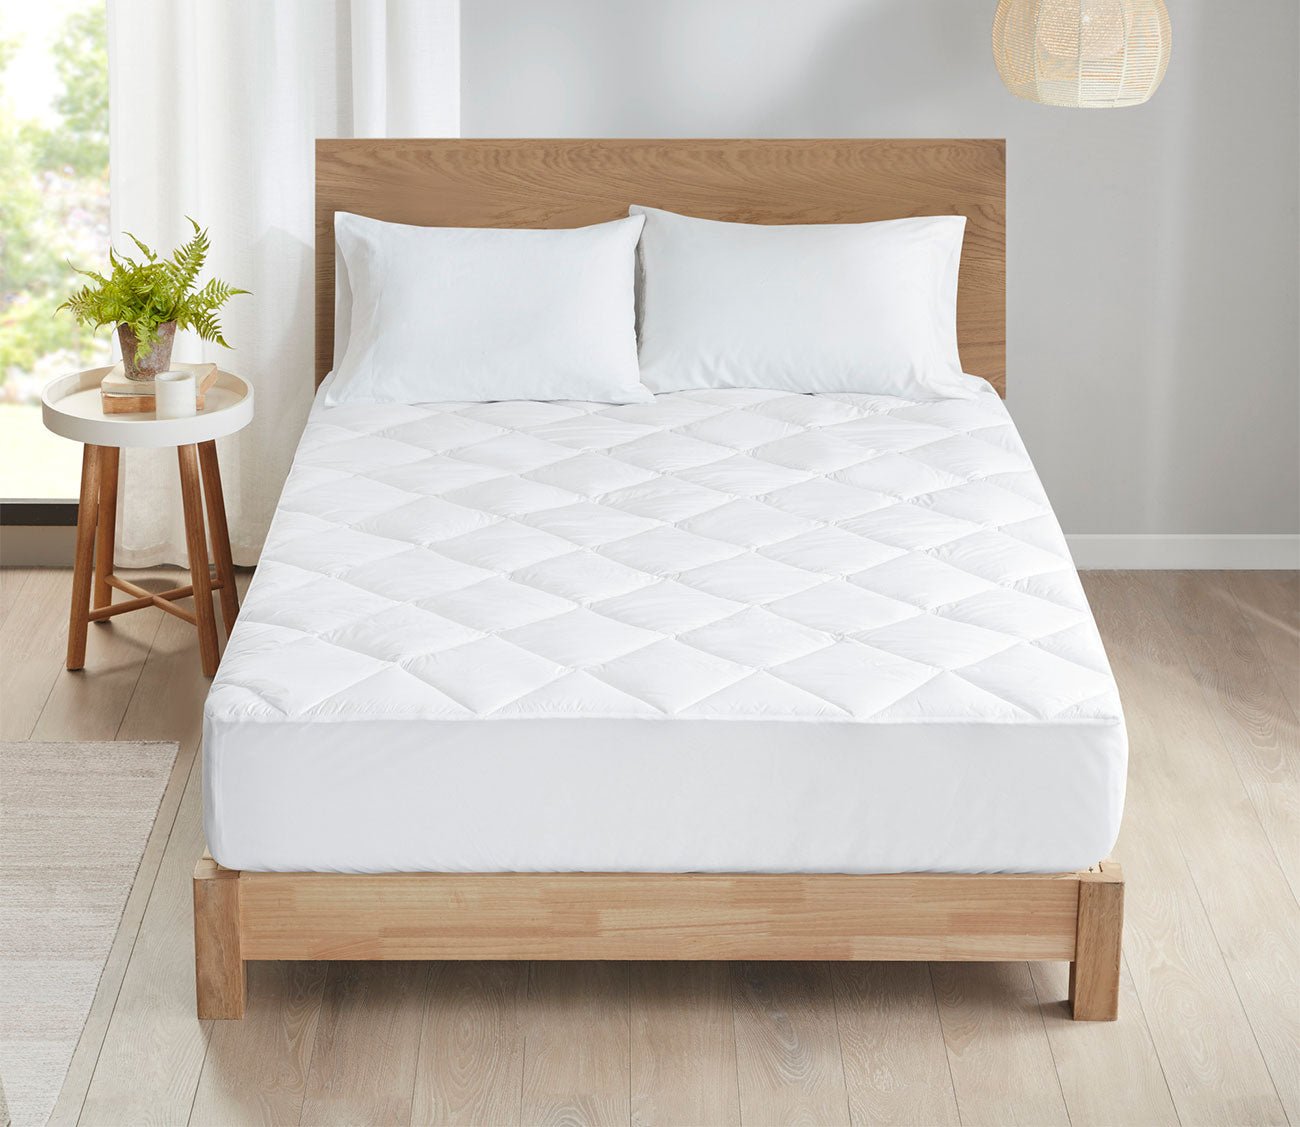 Allergen Barrier Antimicrobial Mattress Pad by Clean Spaces